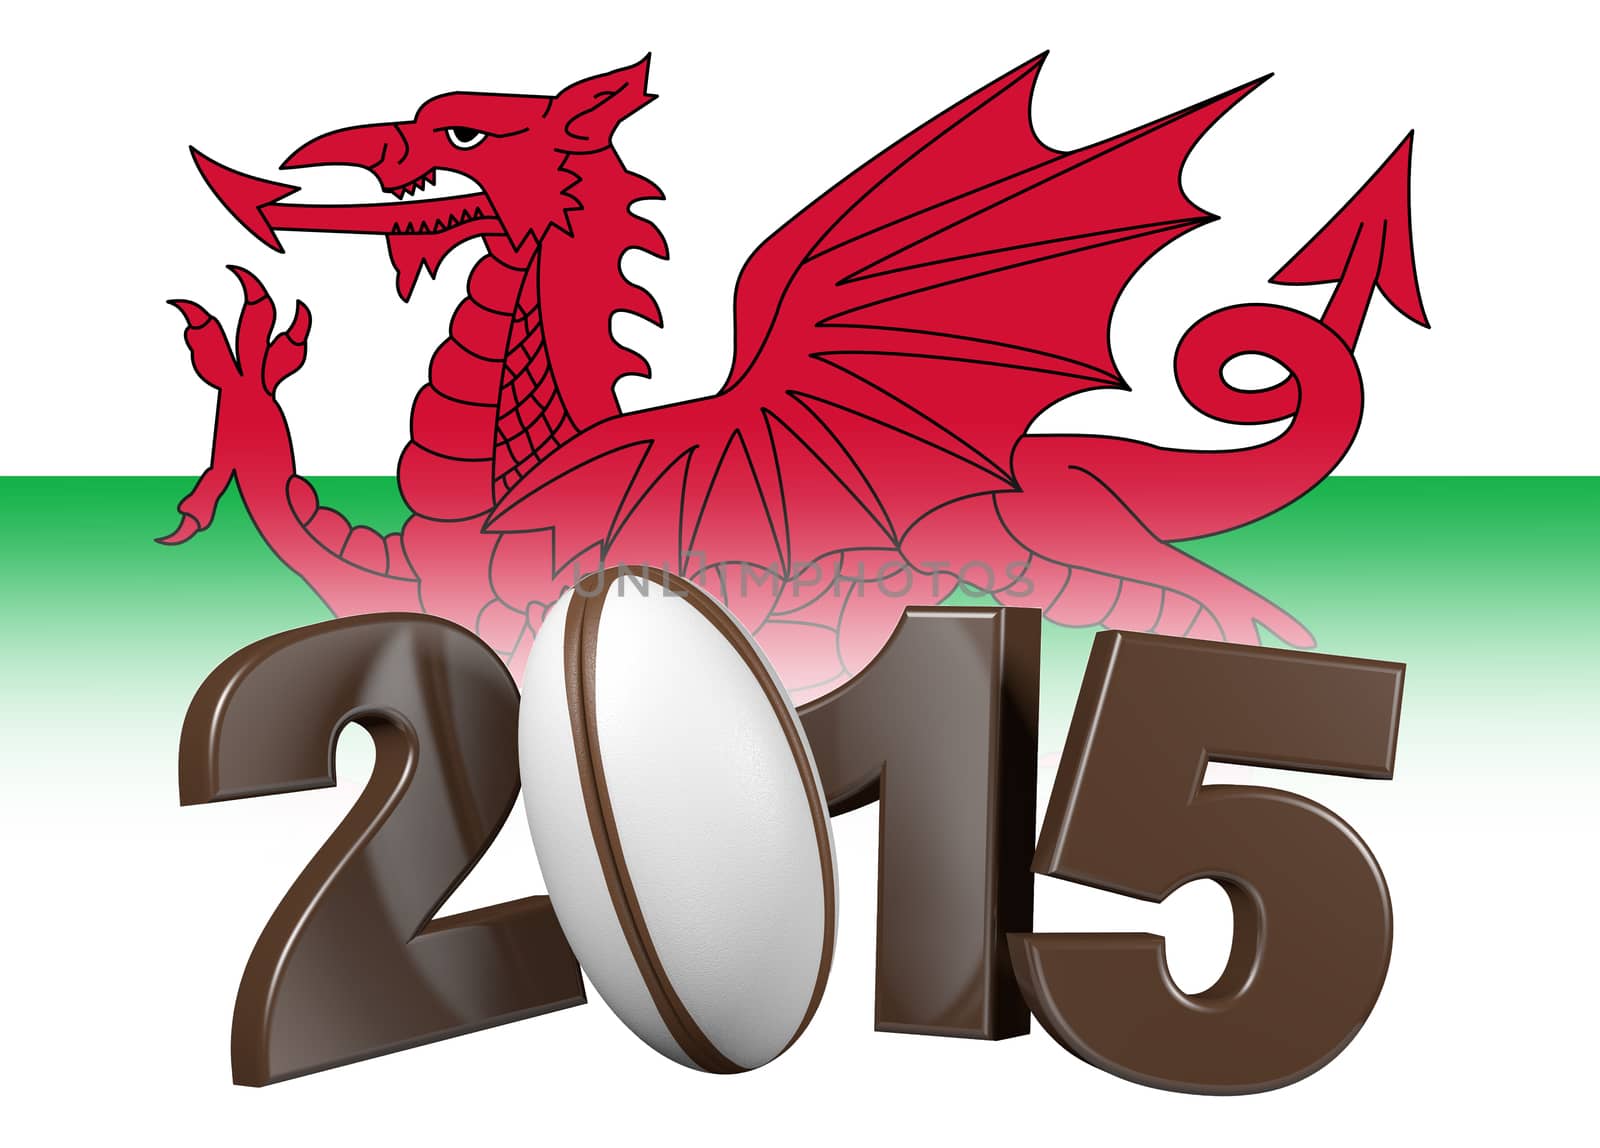 Brown Rugby 2015 design with Wales Flag